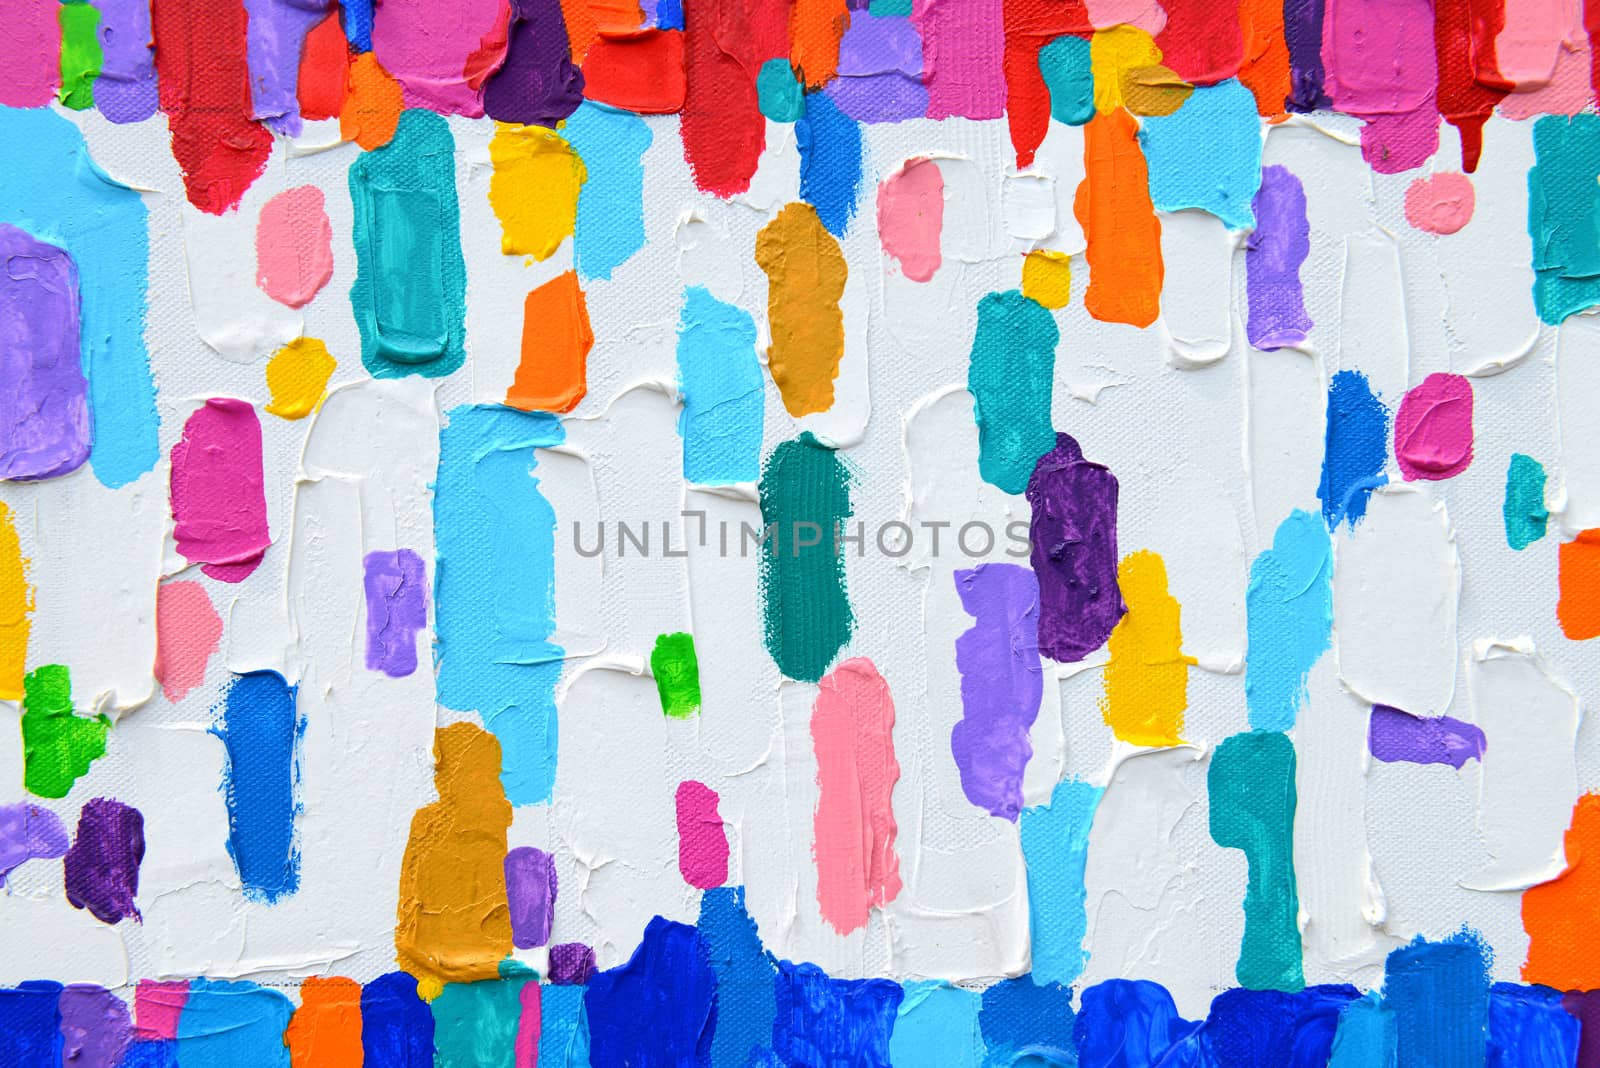 Texture, background and Colorful Image of an original Abstract P by opasstudio